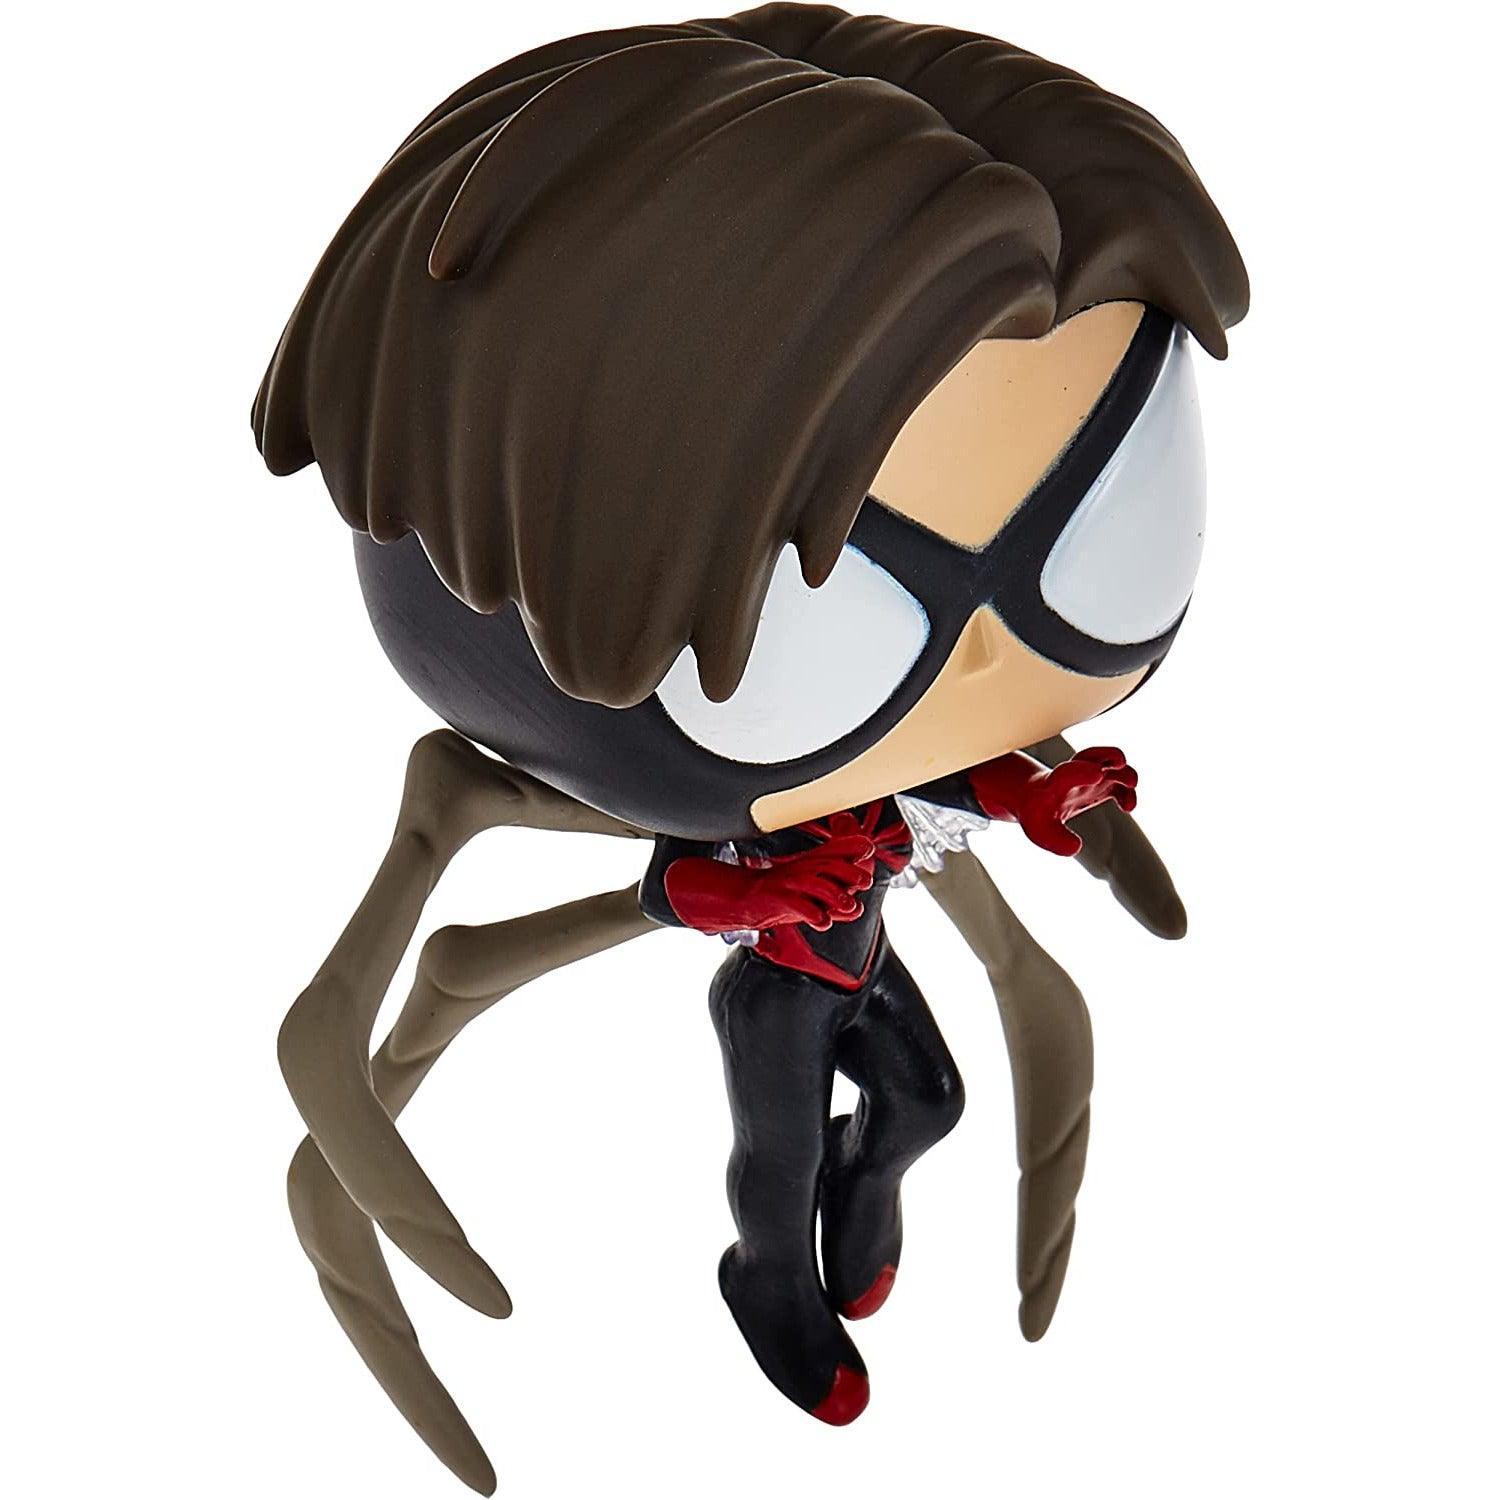 Funko Pop Marvel: Beyond Amazing - Spider-Woman Mattie Franklin - BumbleToys - 18+, Action Figures, Avengers, Boys, Characters, Funko, Girls, Pre-Order